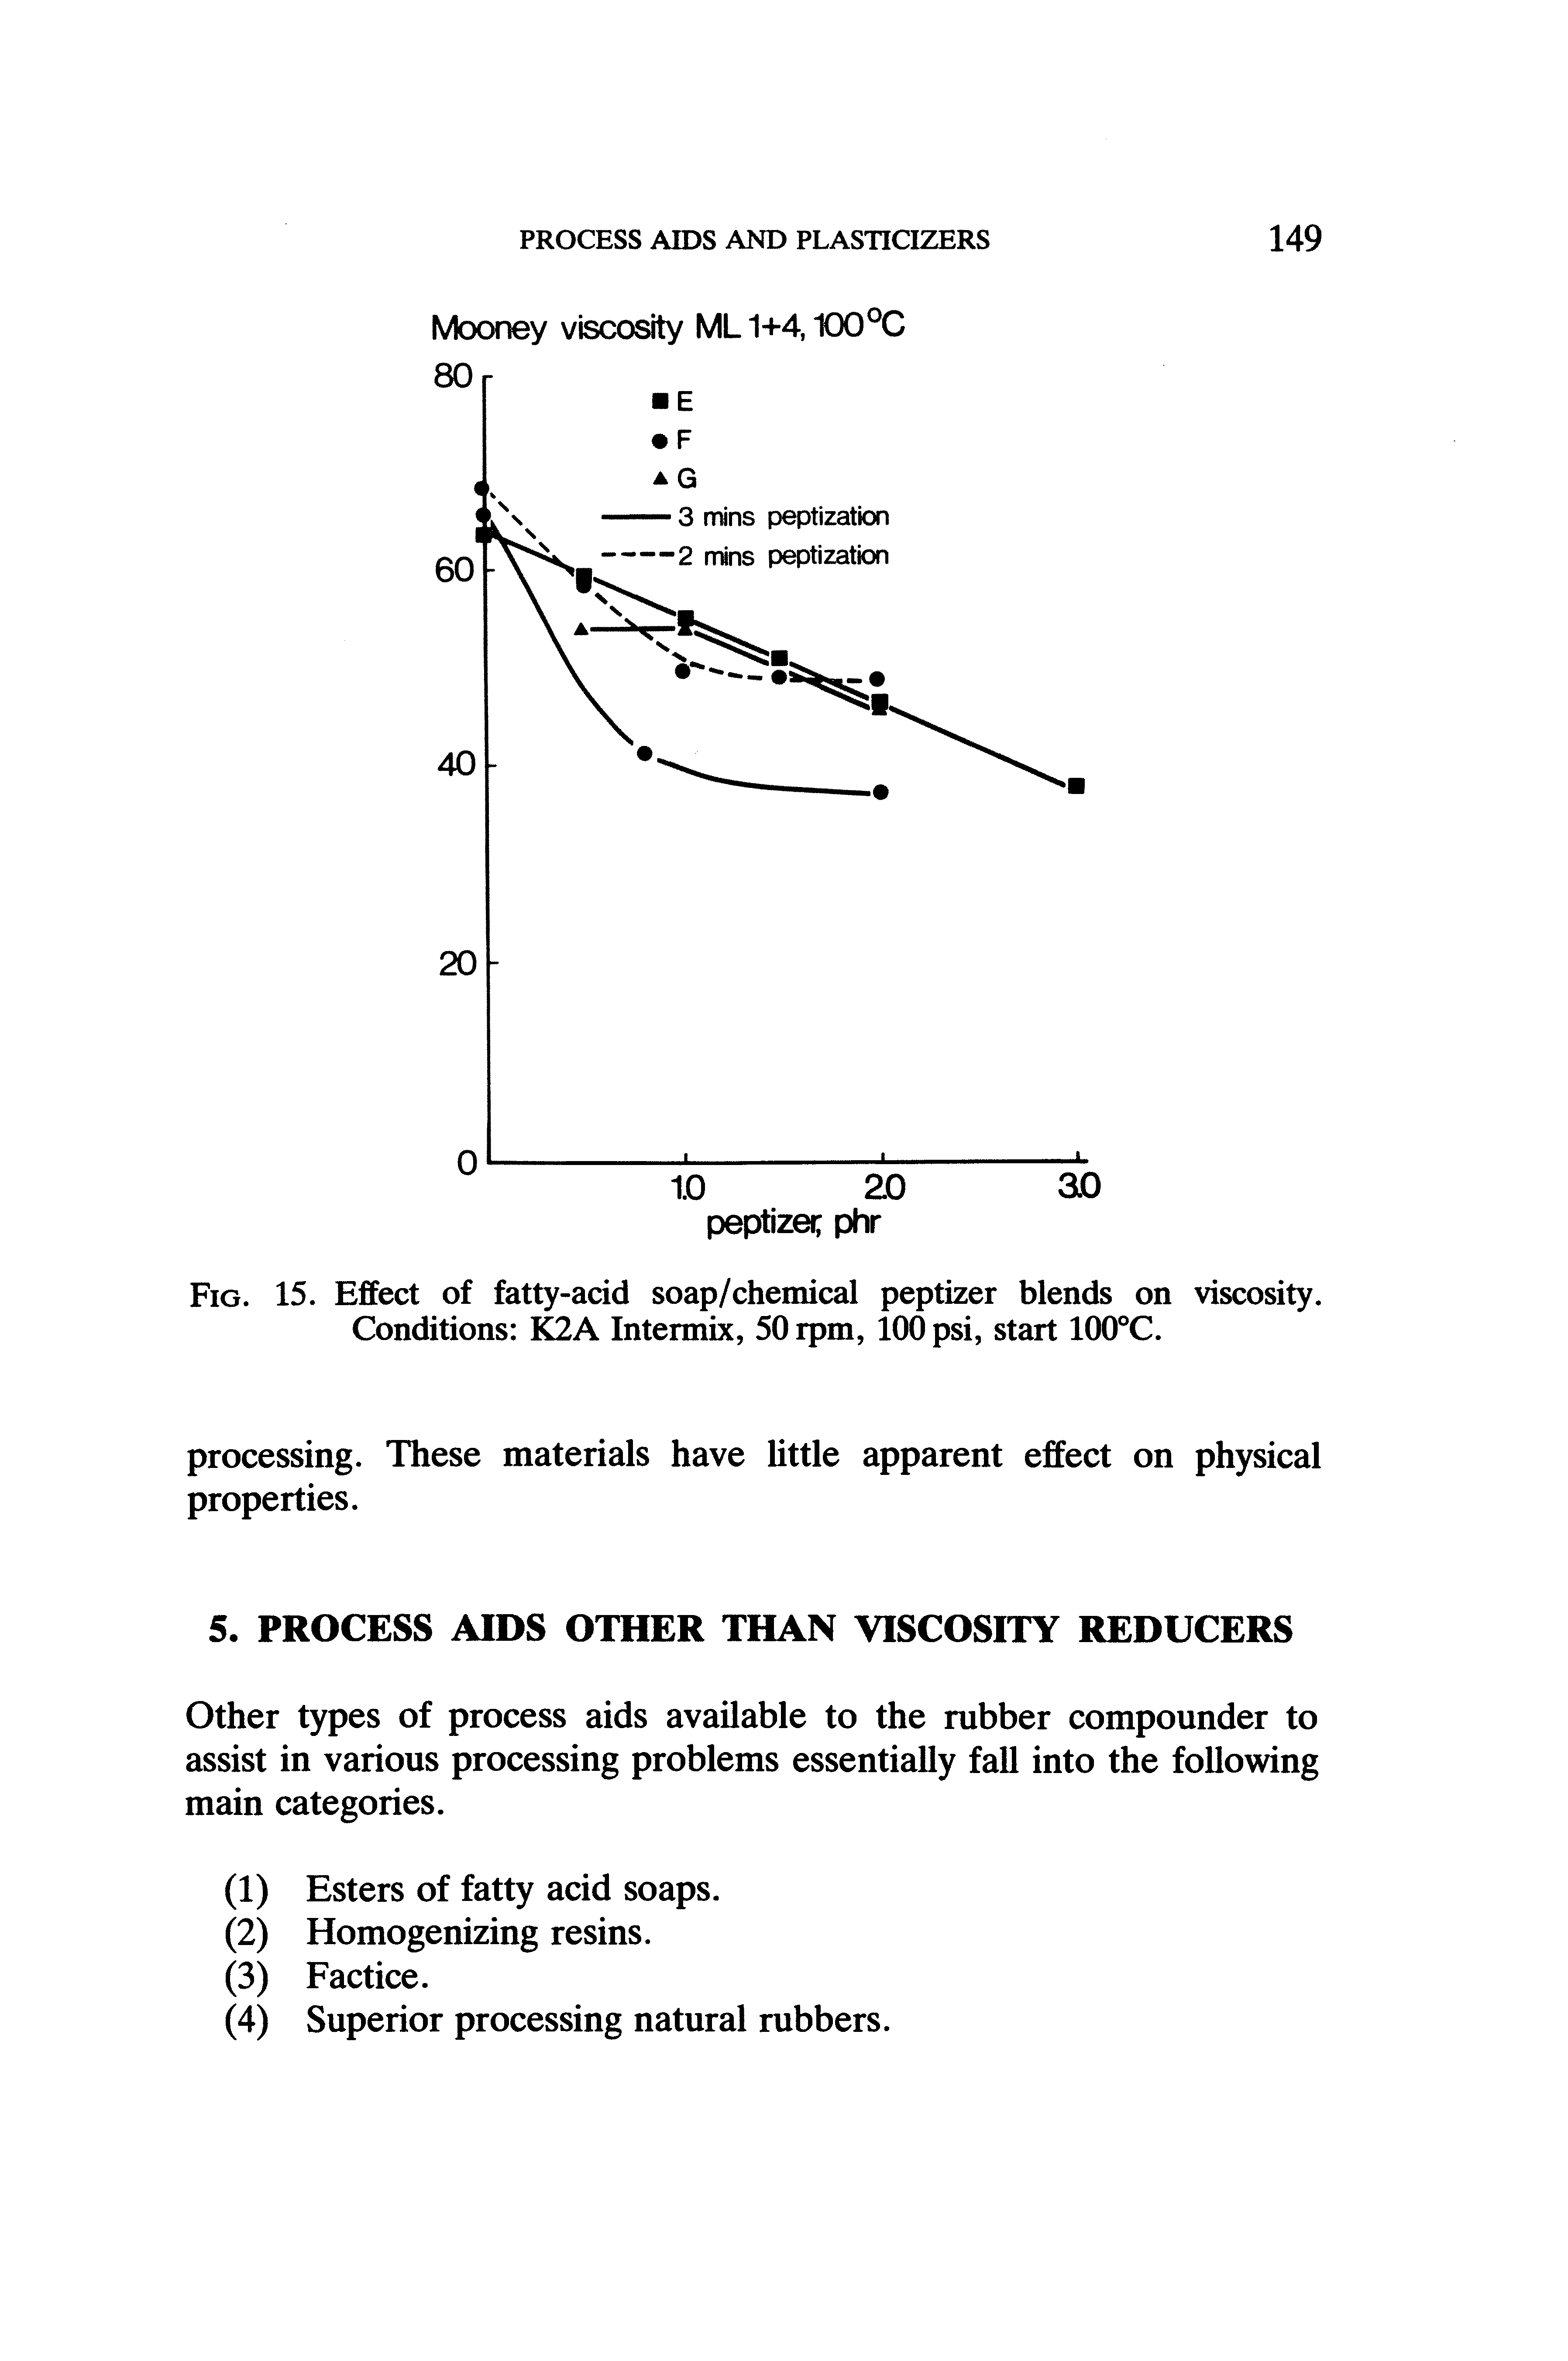 Fig. 15. Effect of fatty-acid soap/chemical peptizer blends on viscosity. Conditions K2A Intermix, 50 rpm, 100 psi, start 100°C.